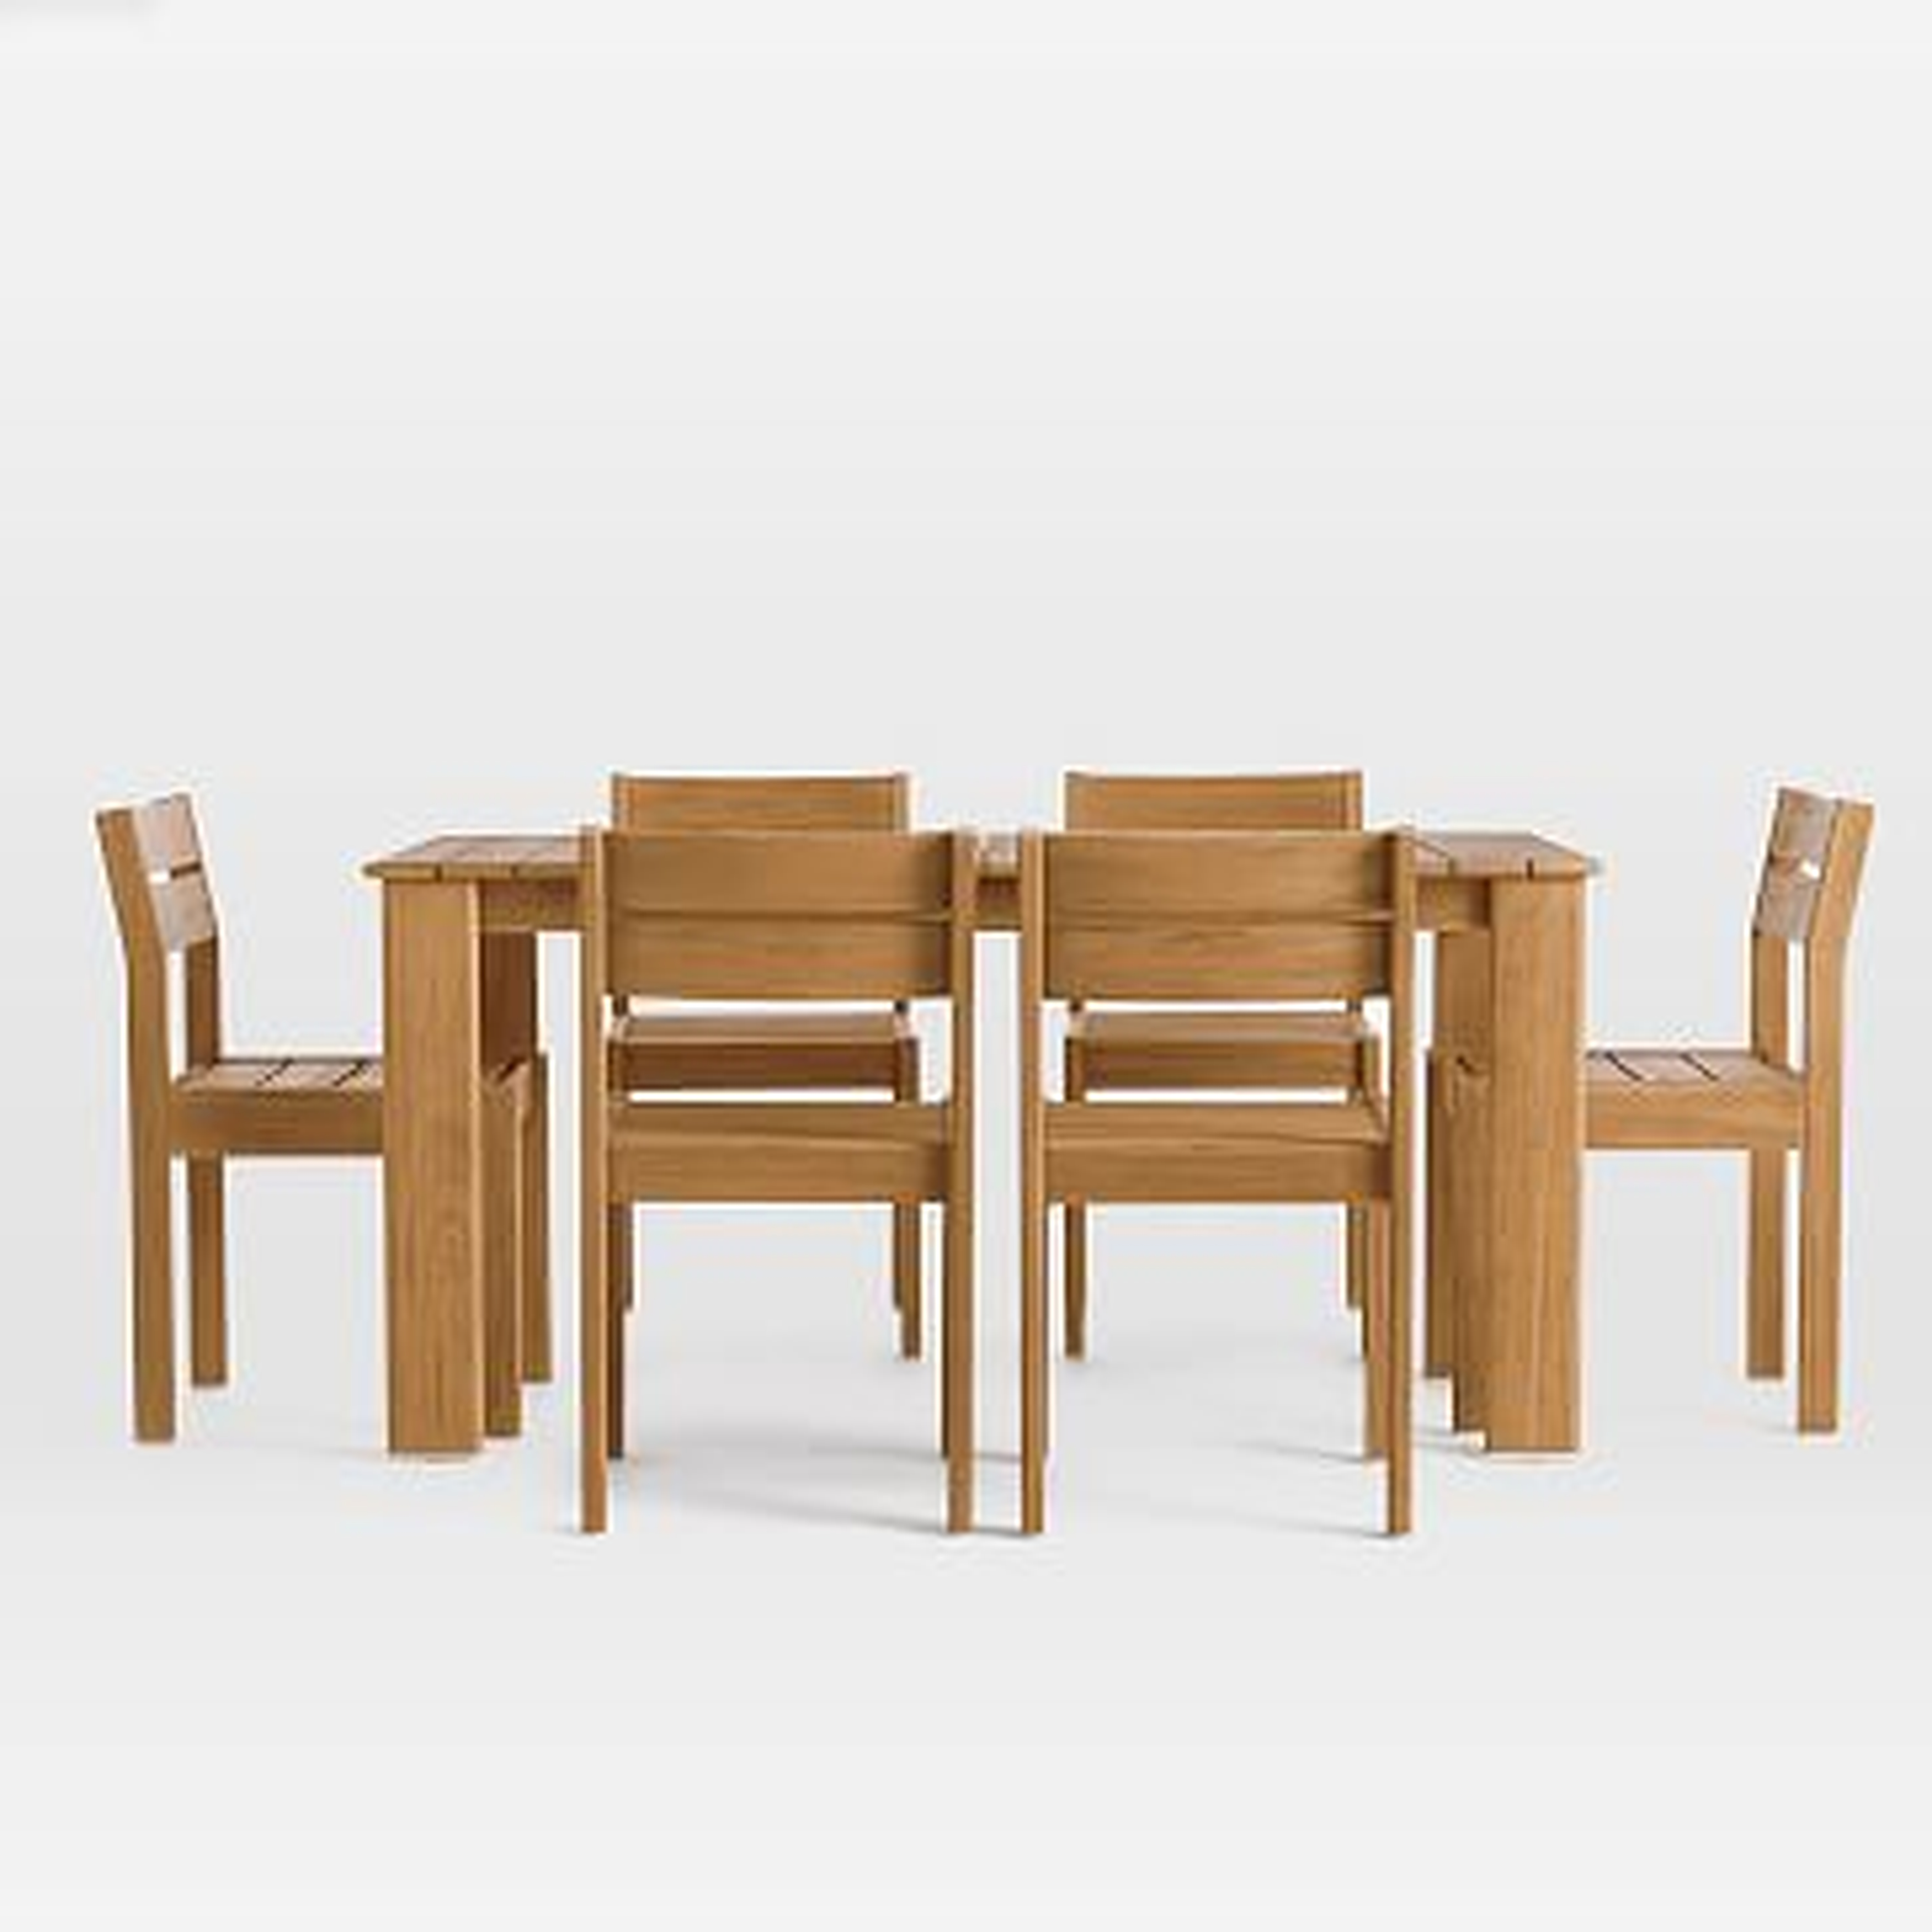 Playa Outdoor Dining Table + Chairs Set - West Elm